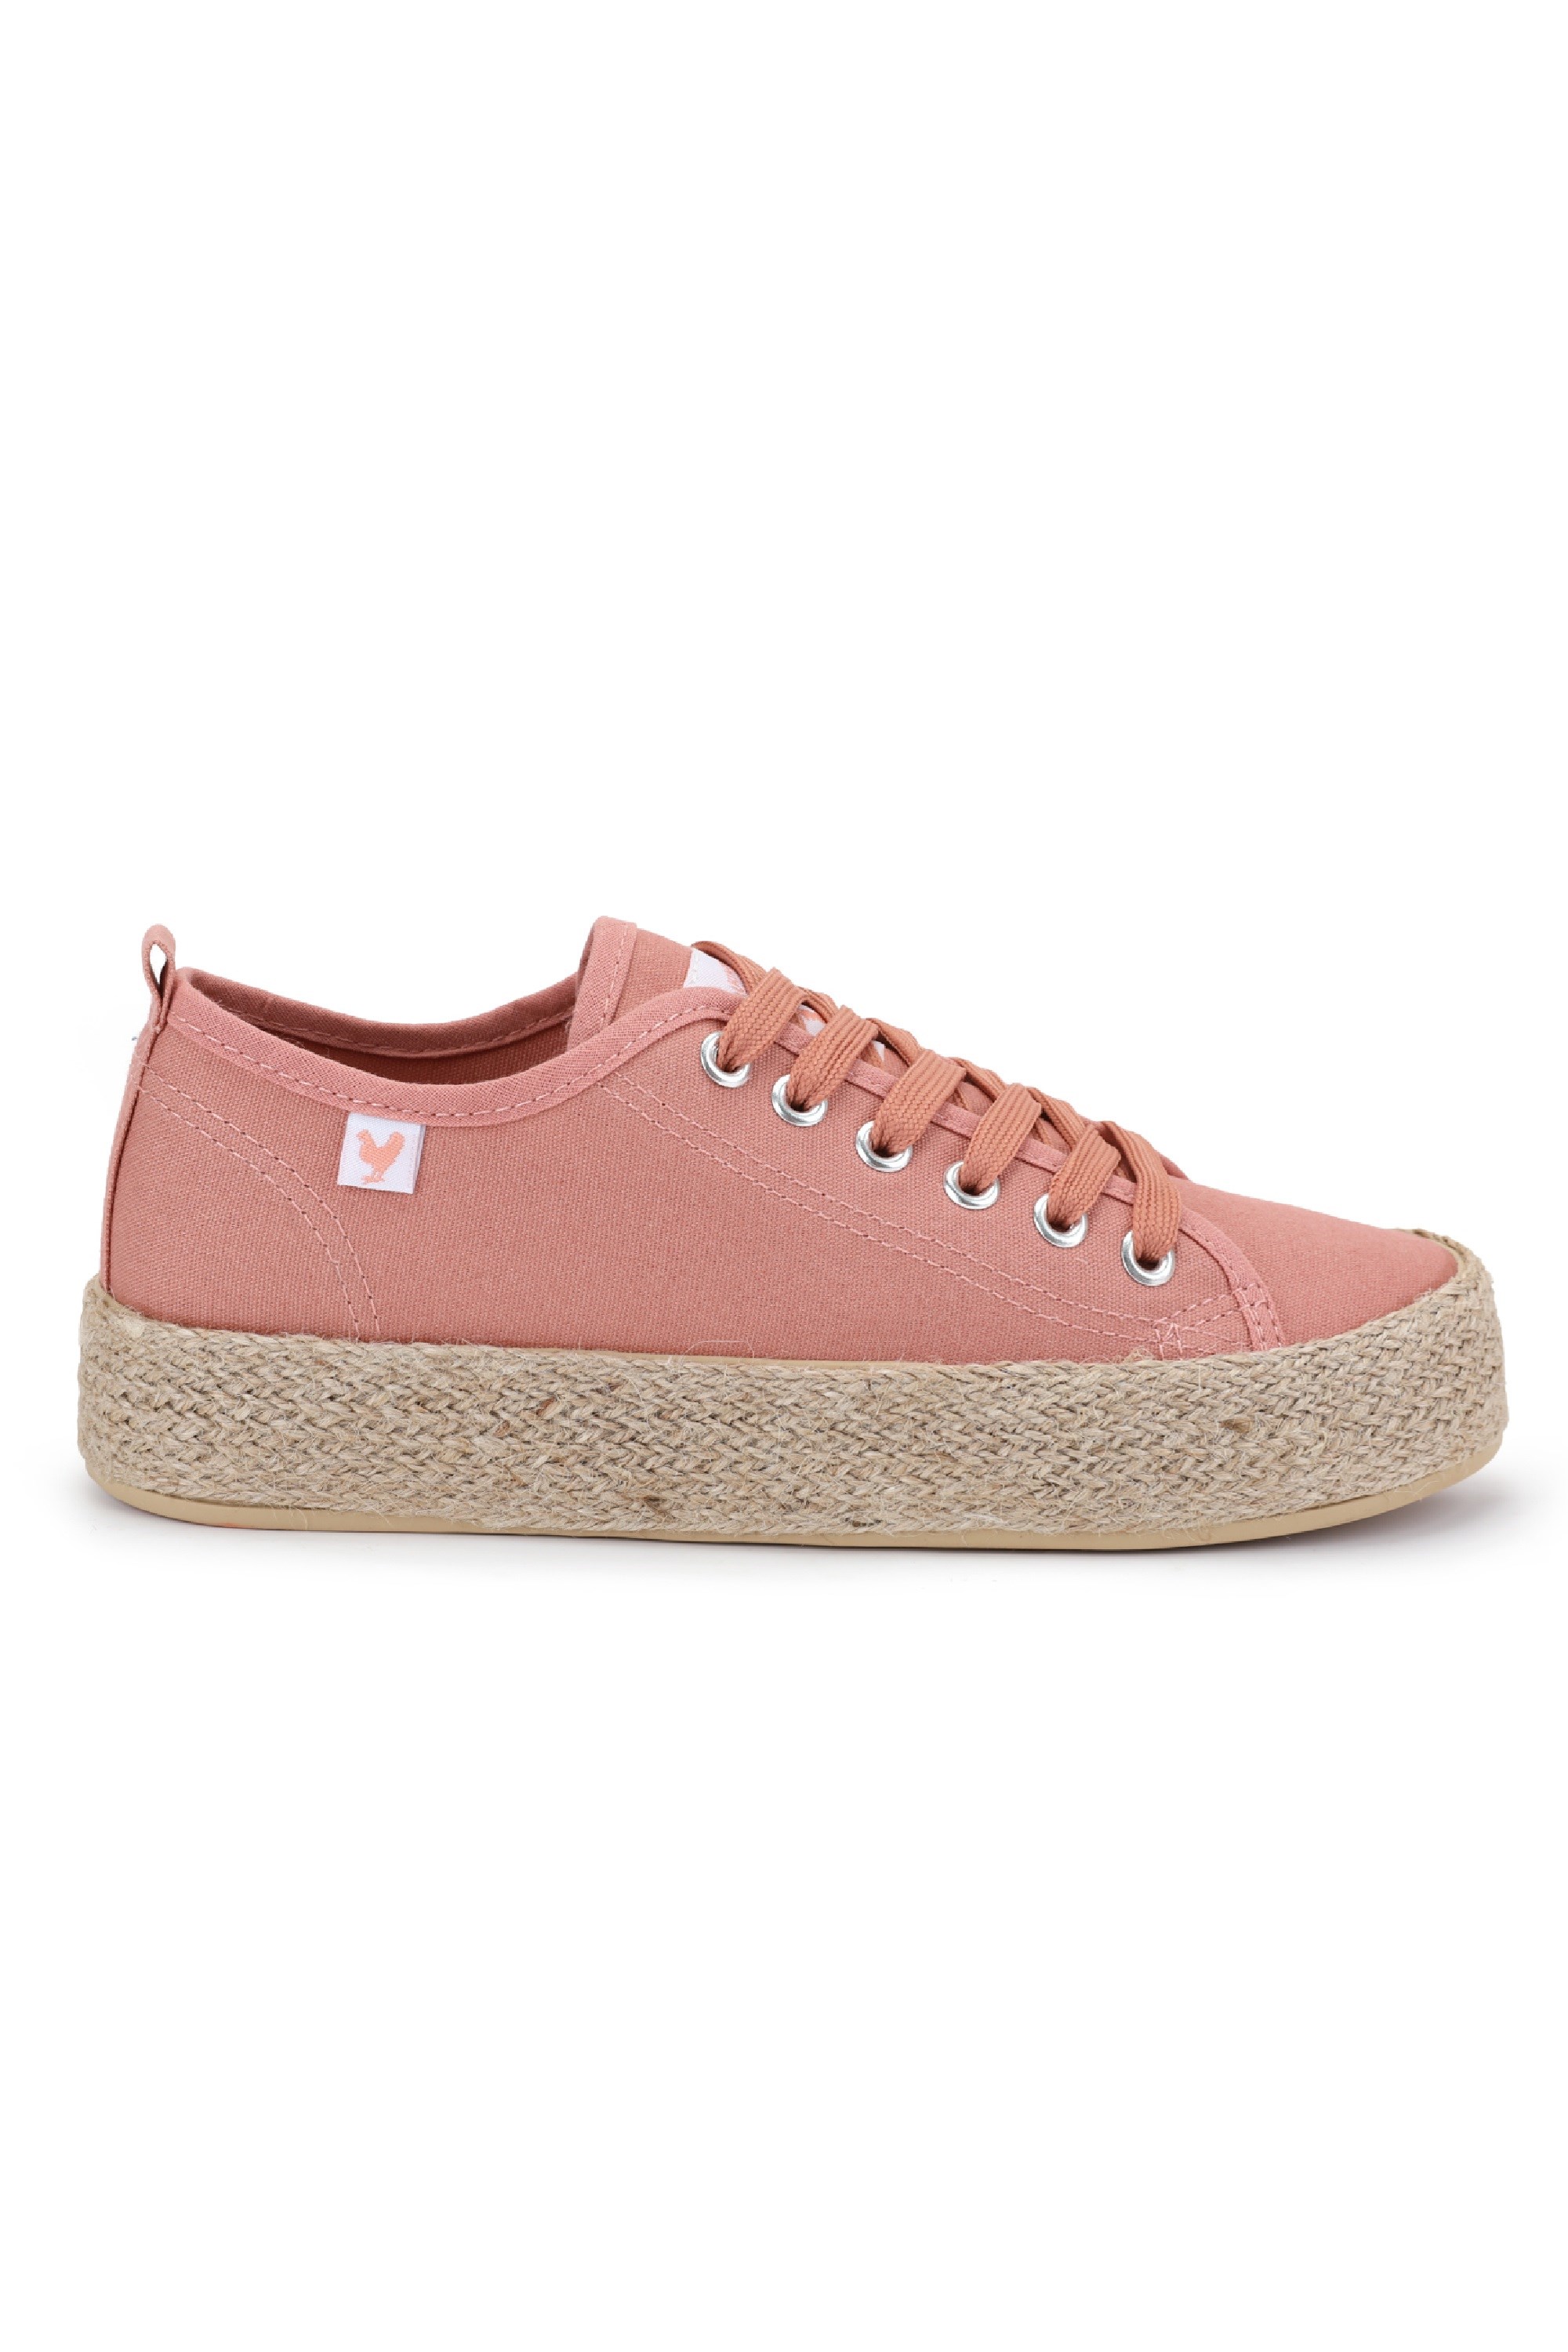 Canvas Lace-Up Womens Espadrille Sneakers -